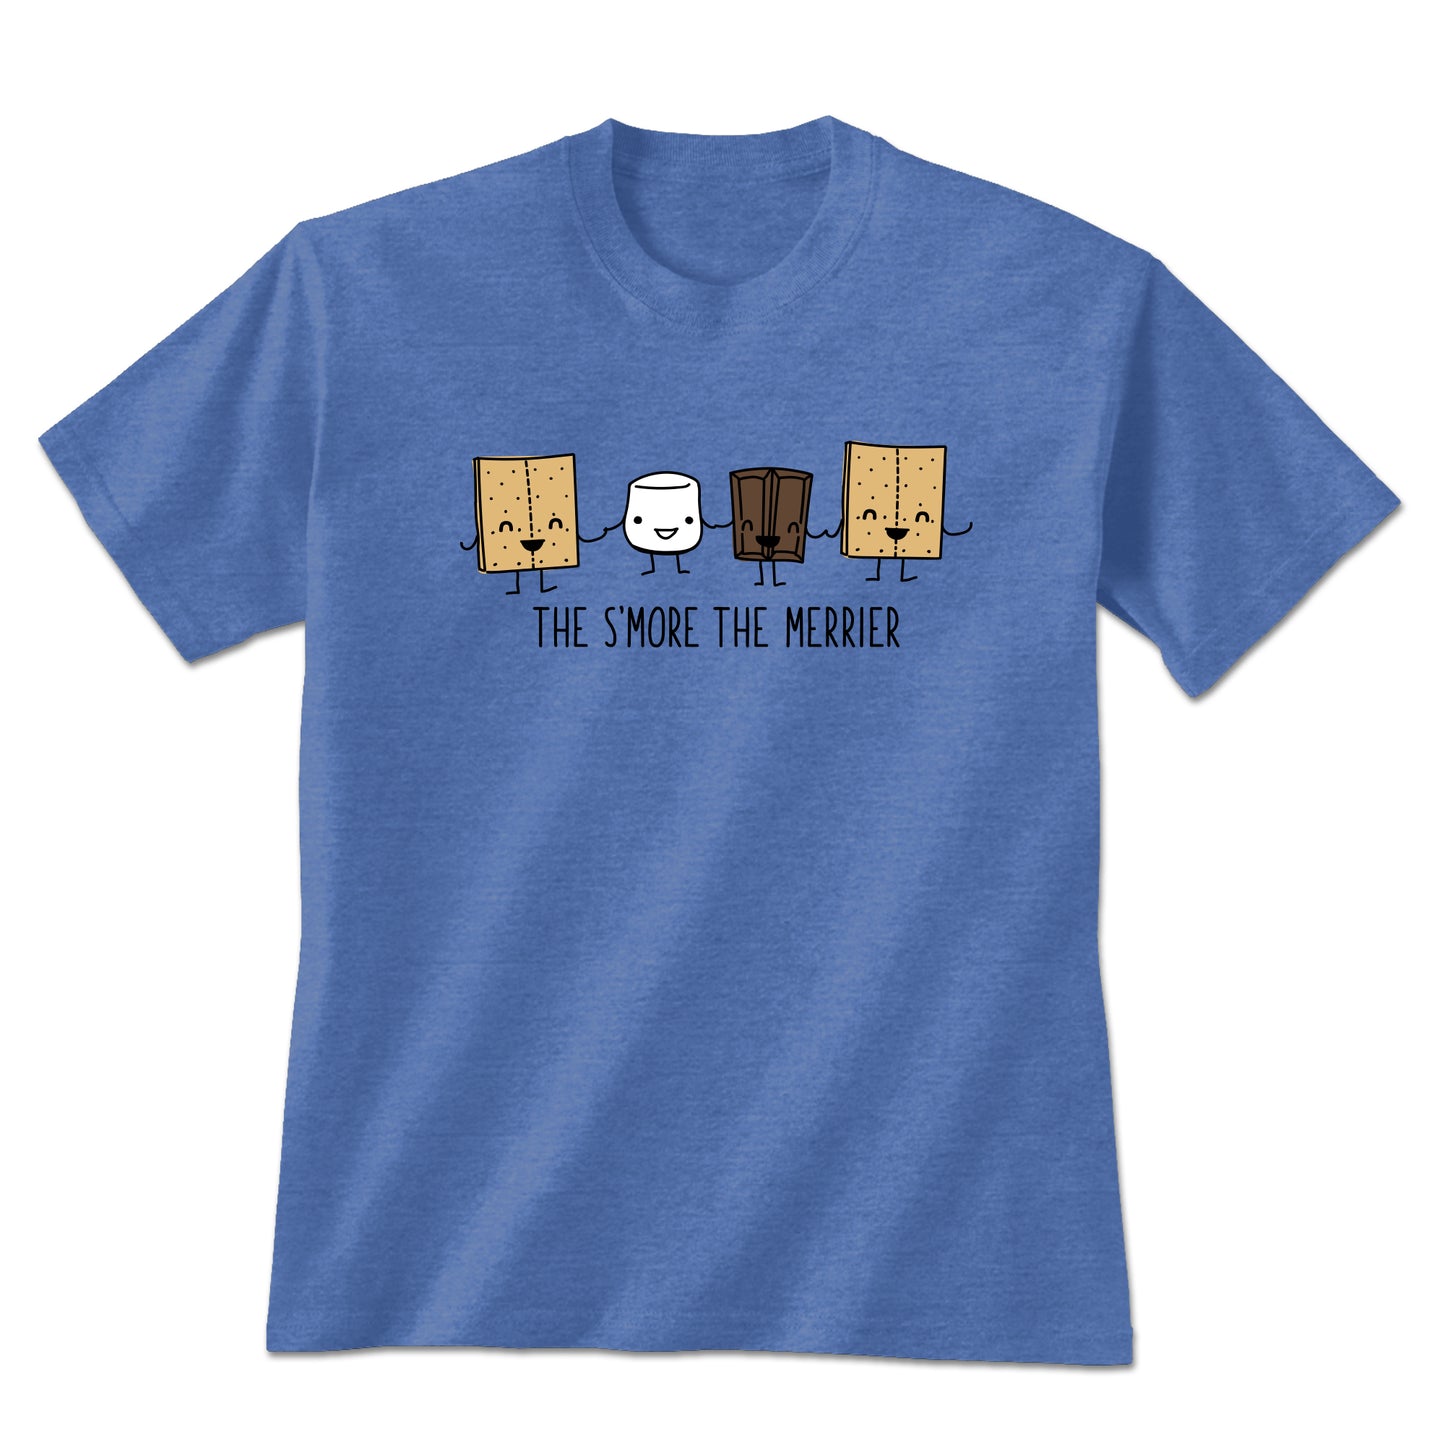 The S'more the Merrier T-Shirt